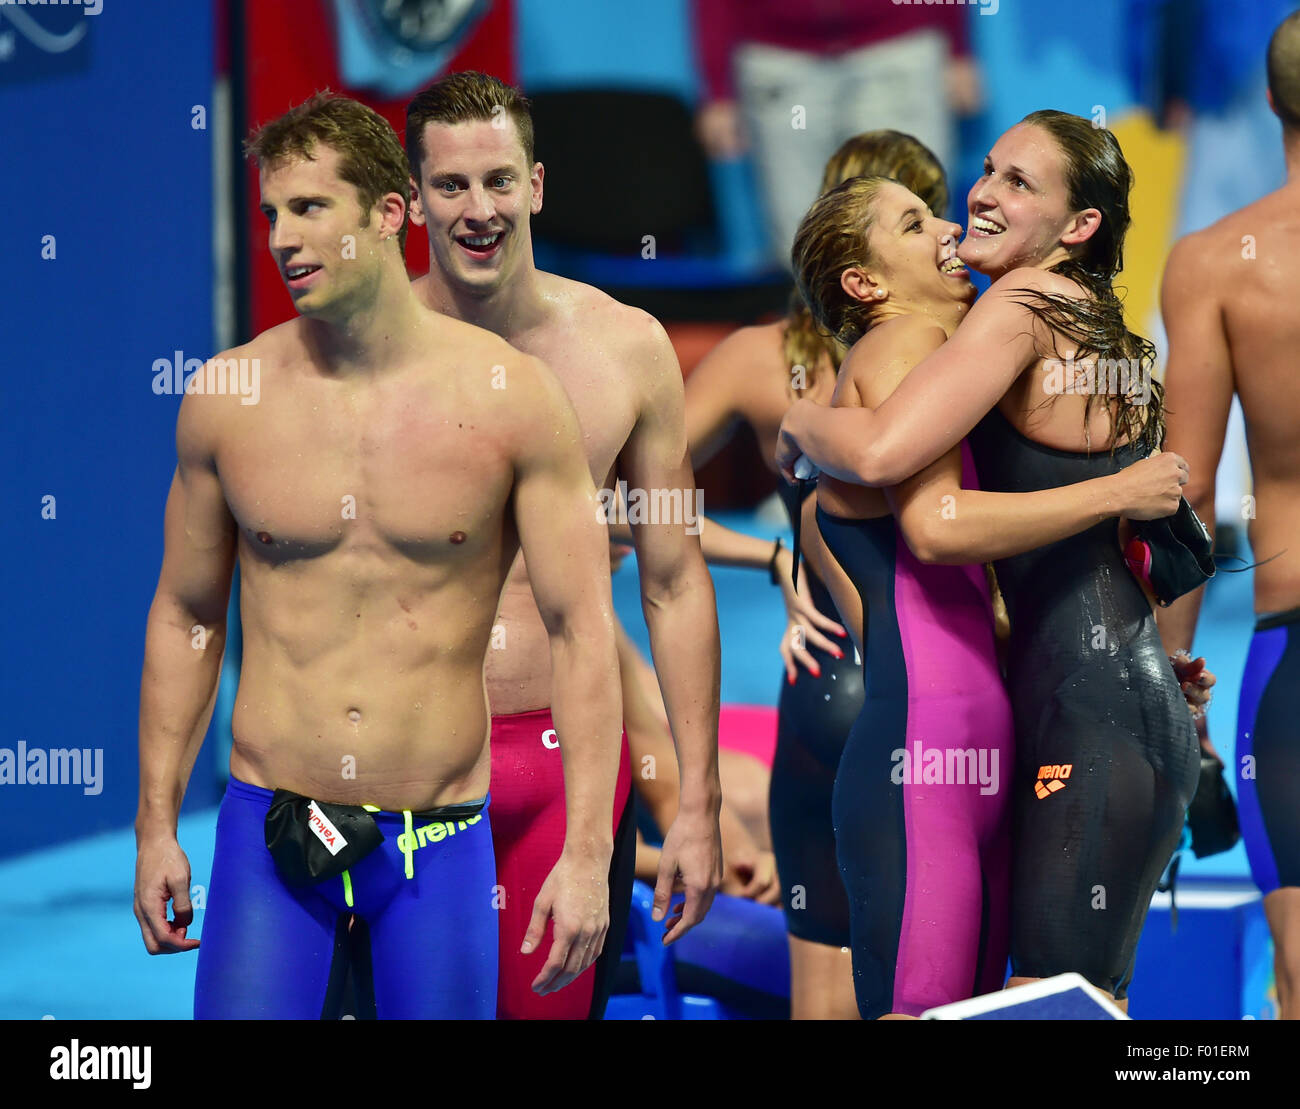 Kazan, Russia. 05th Aug, 2015. Bronze medalist's Annika Bruhn (R-L), Alexandra Wenk, Jan-Philip Glania and Hendrik Feldwehr of Germany celebrate after the Mixed 4x100m Medley Relay final of the 16th FINA Swimming World Championships at Kazan Arena in Kazan, Russia, 05 August 2015. Photo: Martin Schutt/dpa/Alamy Live News Stock Photo